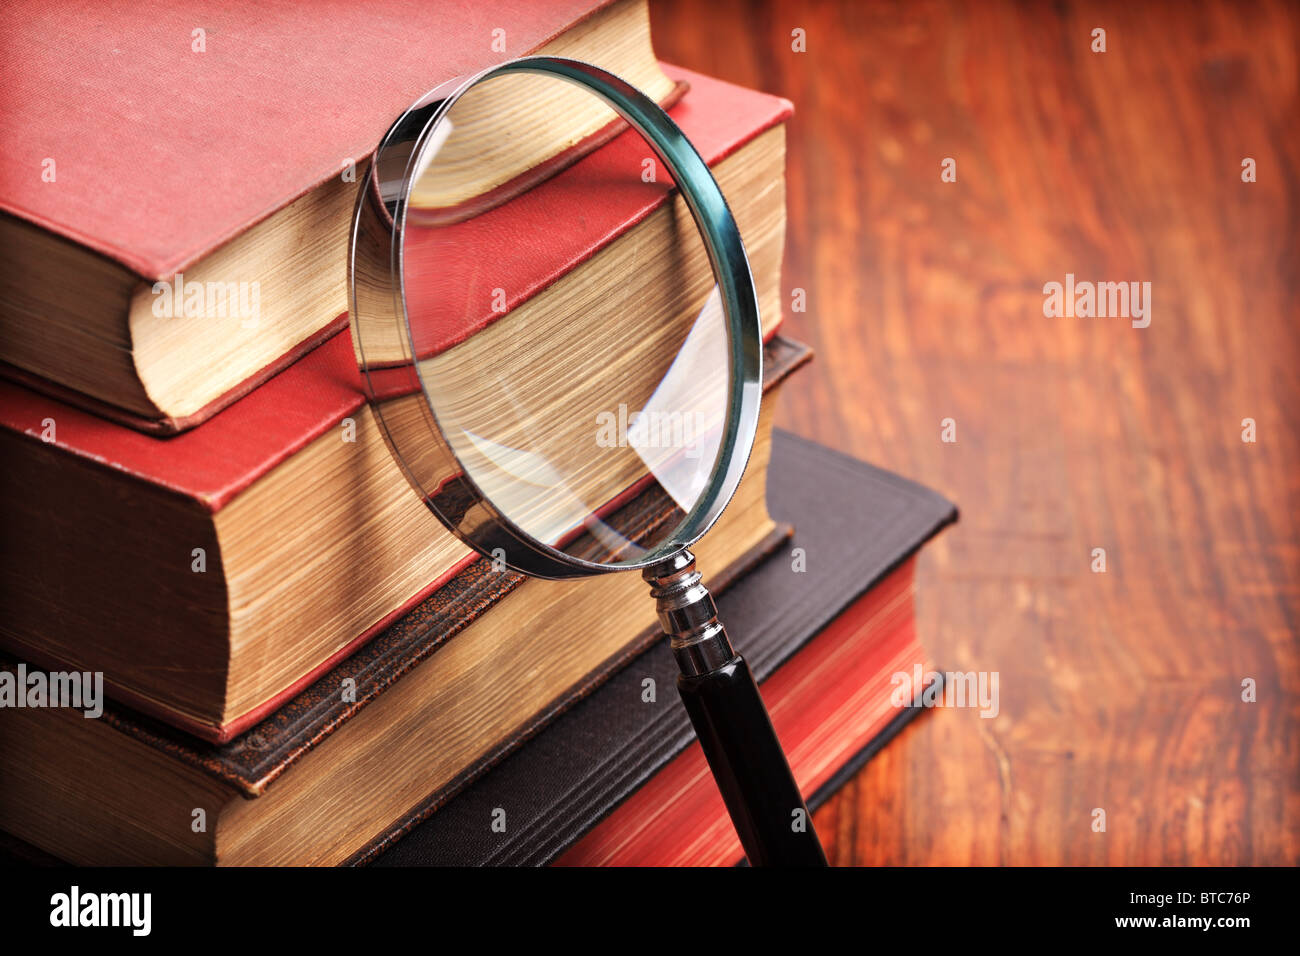 Magnifying glass with old books Stock Photo